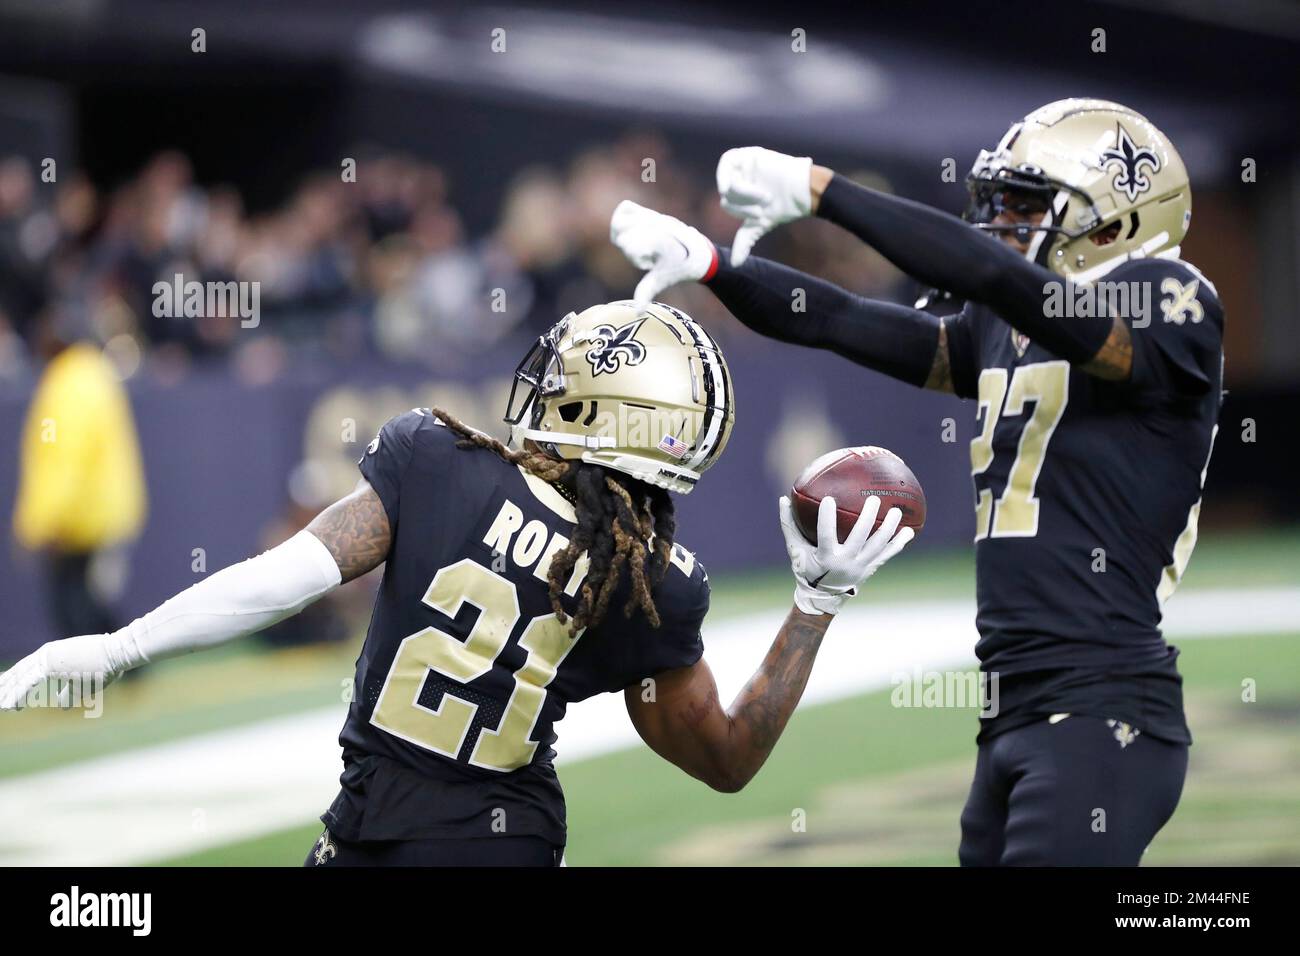 New Orleans, USA. 18th Dec, 2022. New Orleans Saints cornerback Bradley Roby (21) throws the ball into the stands while celebrating a recovered fumble with fellow cornerback Alontae Taylor (27) during a NFL contest at Caesars Superdome in New Orleans, Louisiana on Sunday, December 18, 2022. (Photo by Peter G. Forest/Sipa USA) Credit: Sipa USA/Alamy Live News Stock Photo